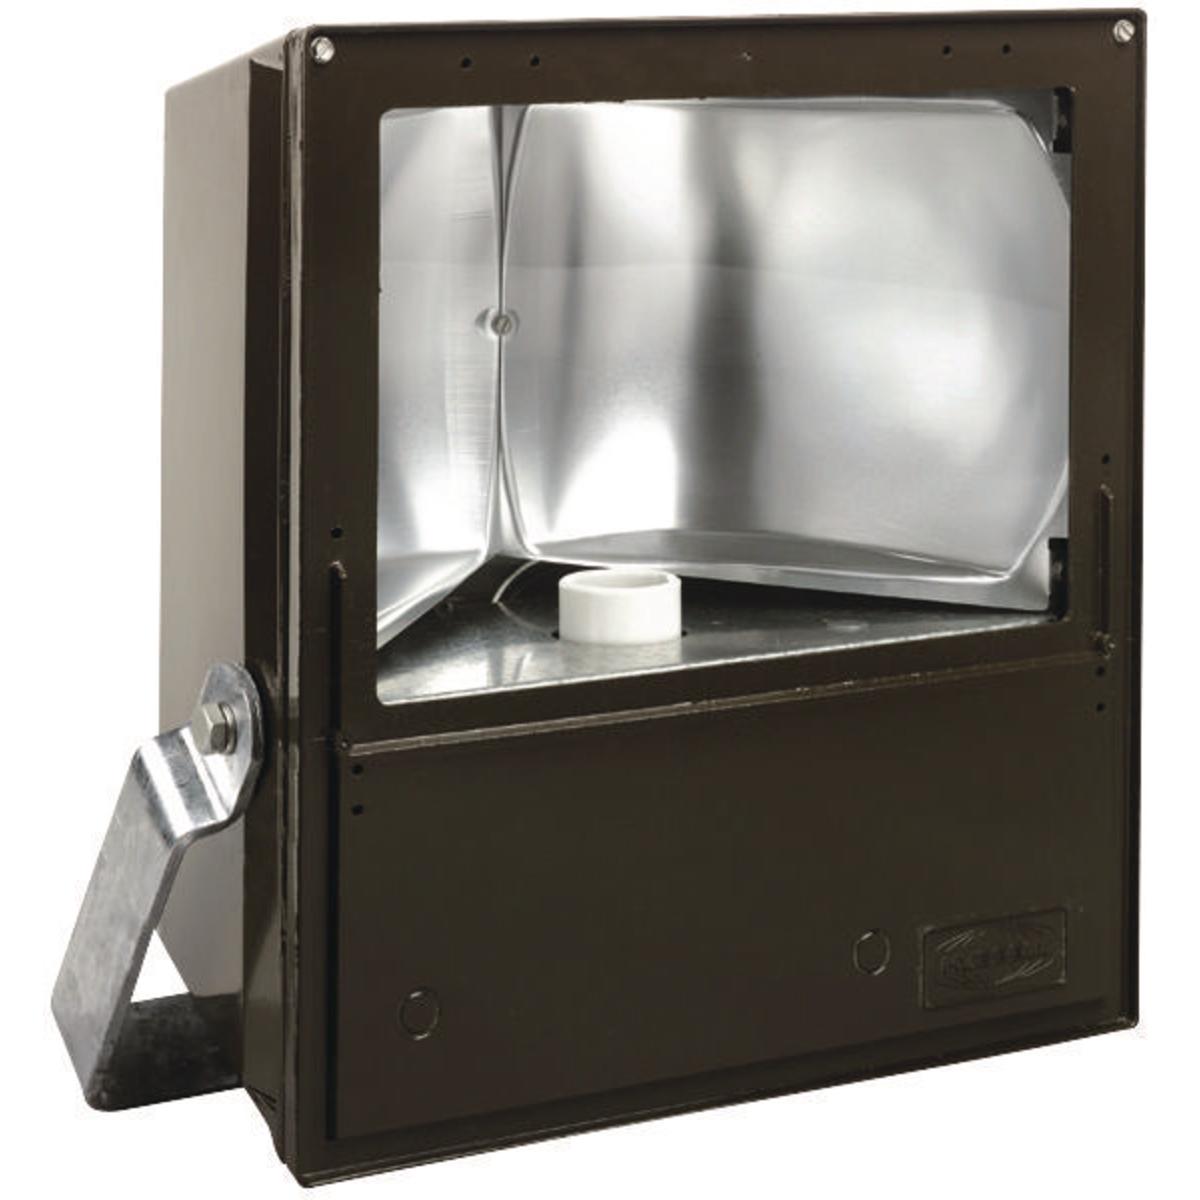 Hubbell KFP325-76 KF Series - Aluminum 320 Watt Pulse Start Metal Halide Floodlight (Lamp Not Included) - 480V At 60Hz  ; Rugged weathertight housing of copperfree aluminum with corrosion resistant bronze finish ; Wide beam distribution ; Thermal shock, impact-resistant le